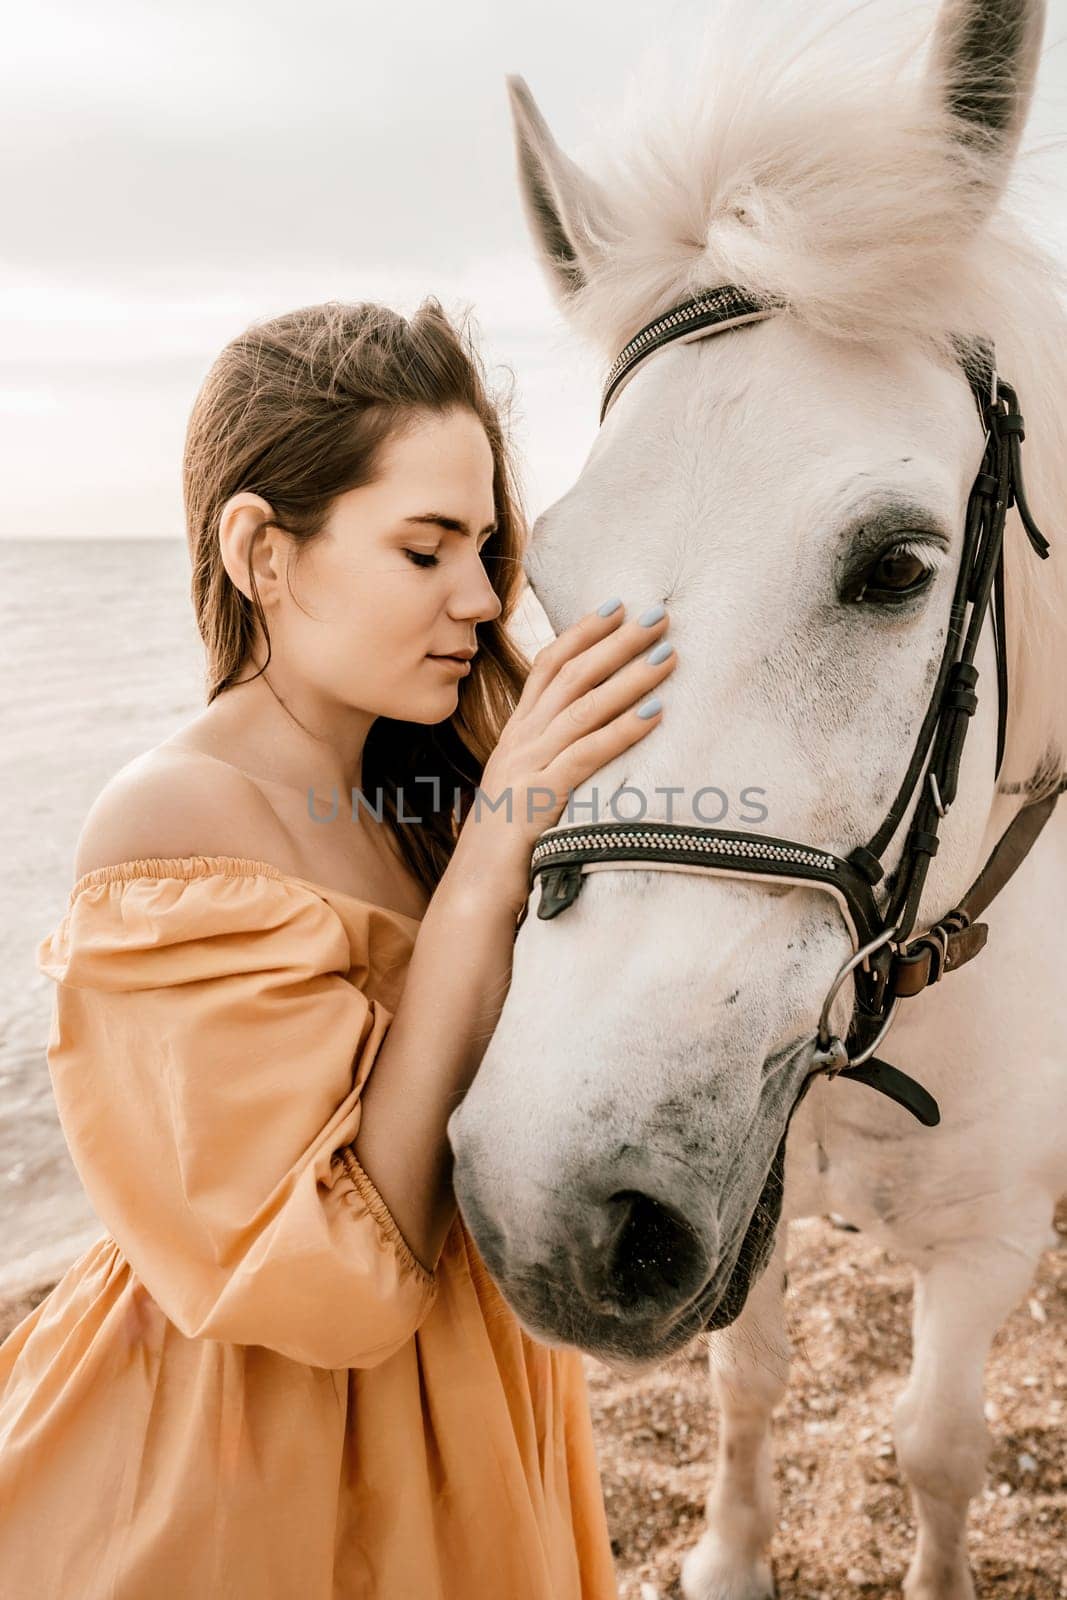 A woman in a dress stands next to a white horse on a beach, with the blue sky and sea in the background